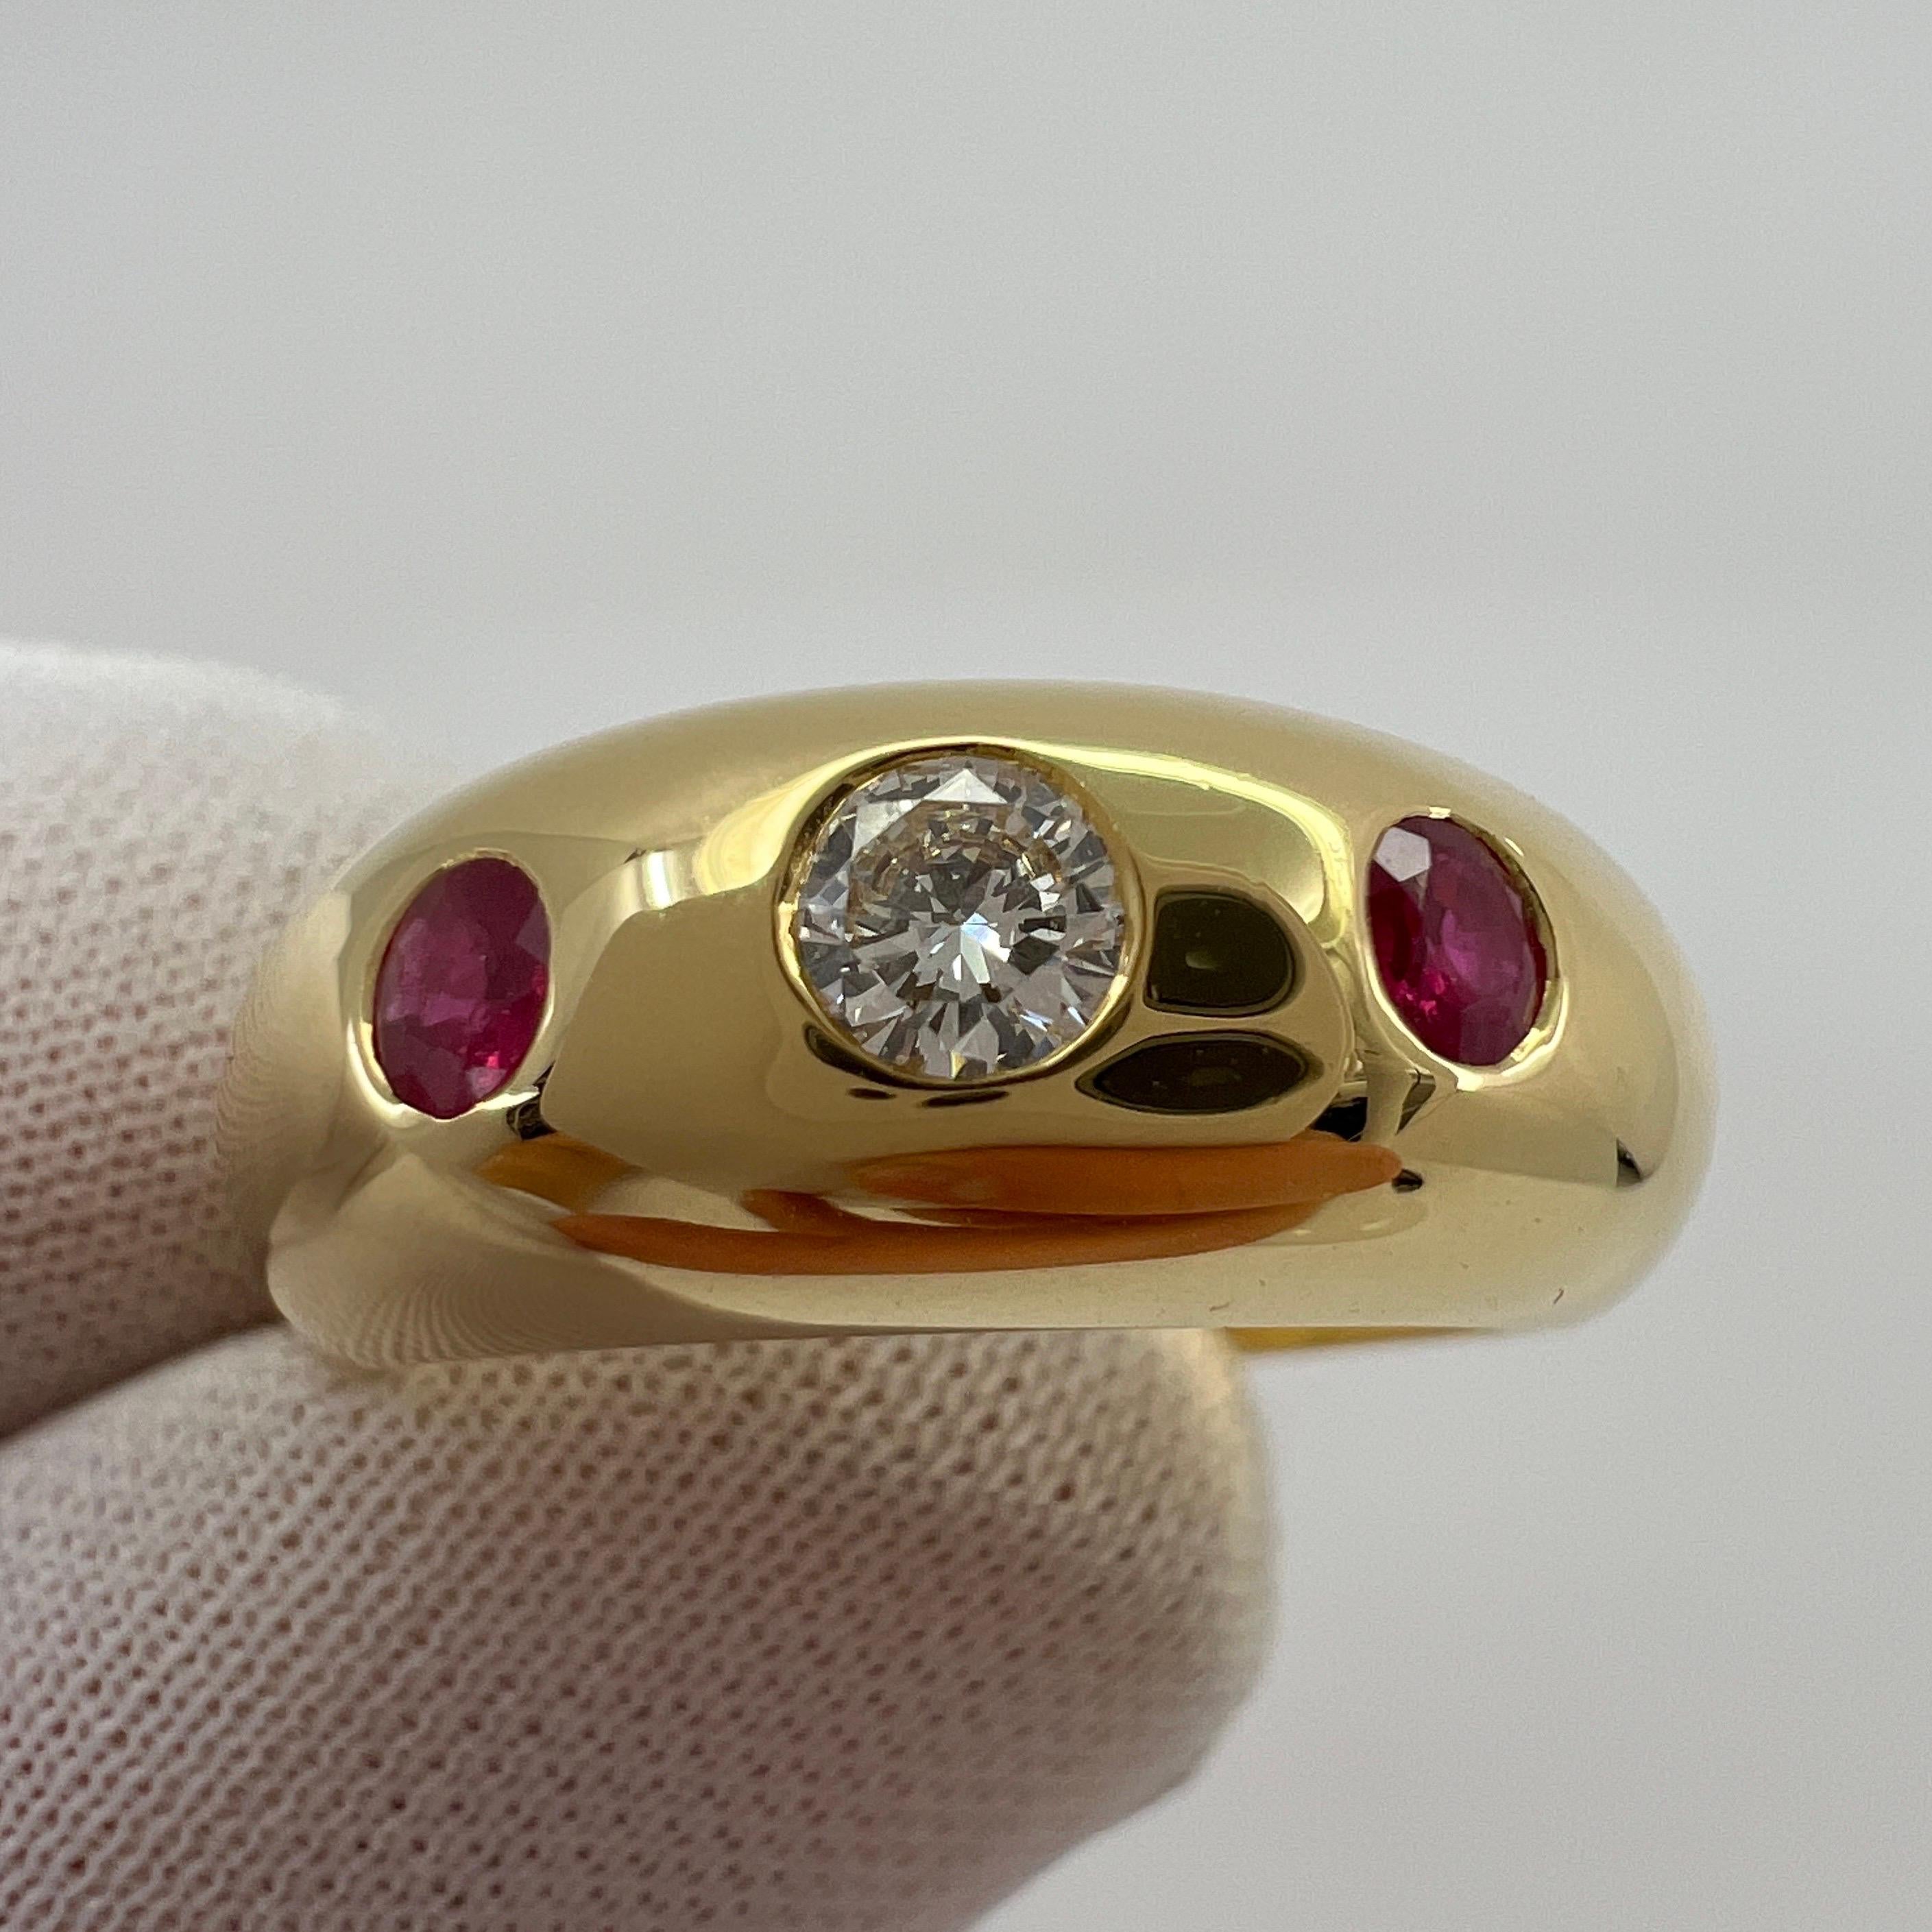 Vintage Cartier Diamond & Ruby 18k Yellow Gold Three Stone Daphne Ring.

Stunning yellow gold Cartier ring set with a beautiful 3.5mm centre diamond with F/G Colour and VVS clarity. This is accented by 2 fine deep red rubies approx 2.5mm each.

Fine